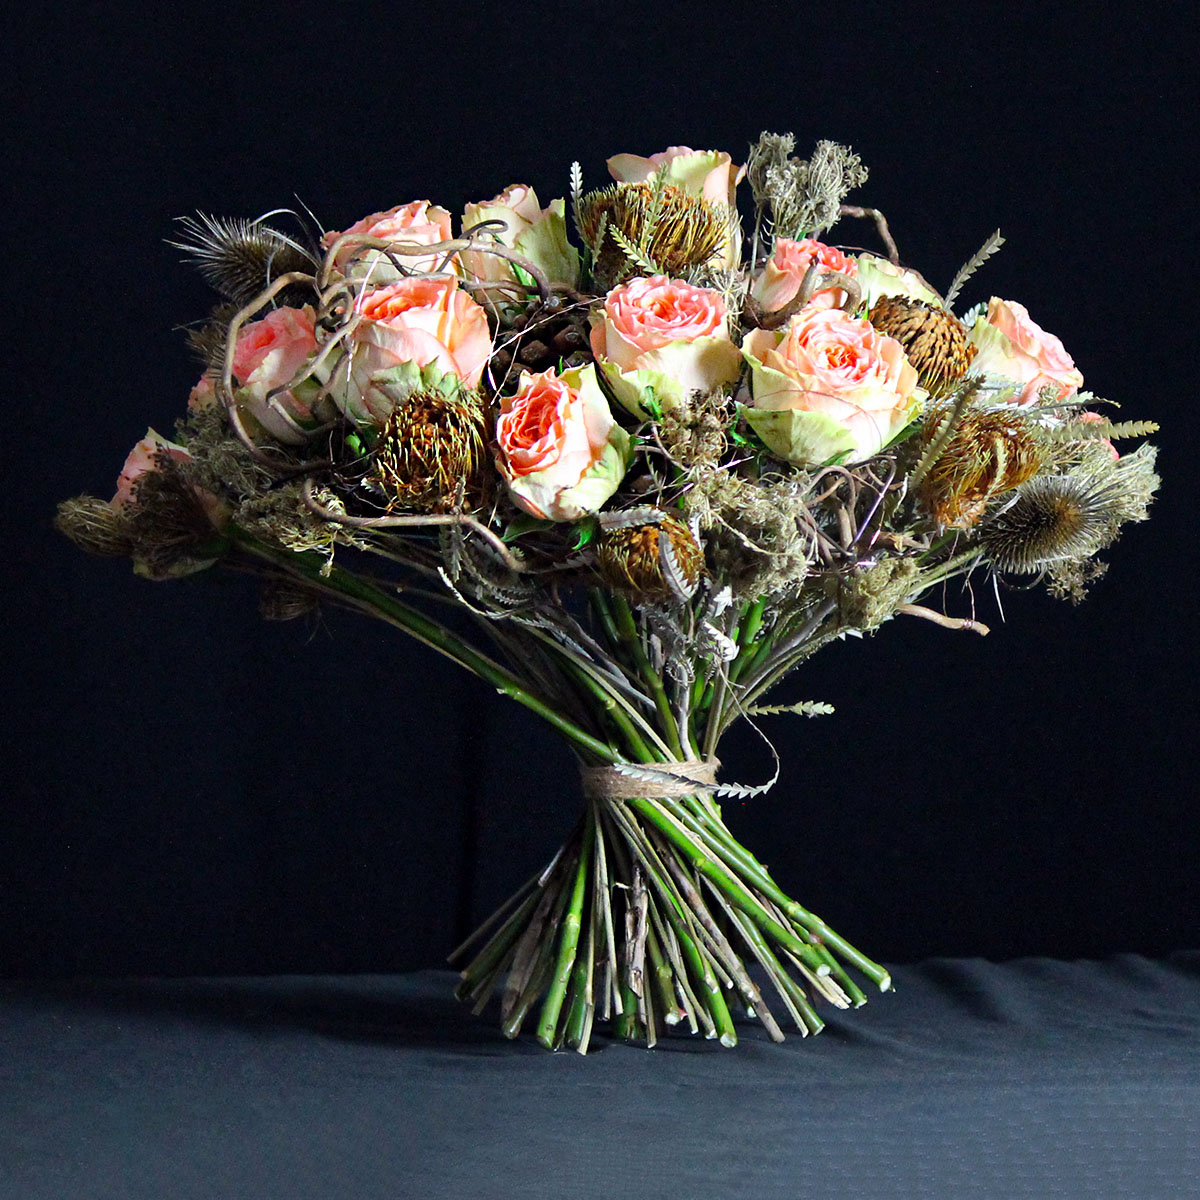 Marvelling at the Incredible Roses From Decofresh - Rose Barbarella 31